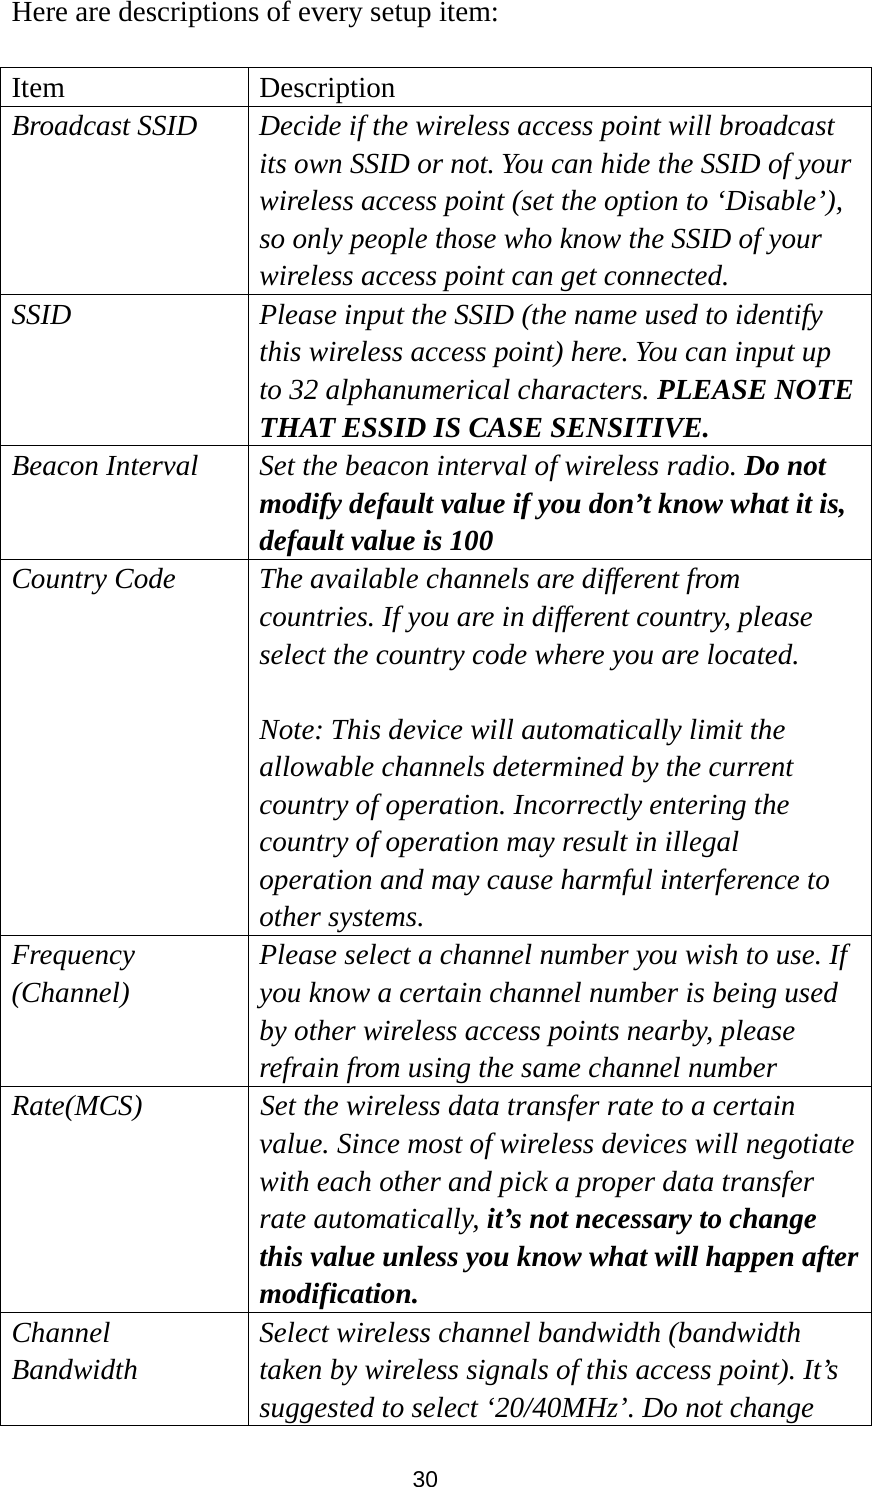 30 Here are descriptions of every setup item:  Item Description Broadcast SSID  Decide if the wireless access point will broadcast its own SSID or not. You can hide the SSID of your wireless access point (set the option to ‘Disable’), so only people those who know the SSID of your wireless access point can get connected. SSID  Please input the SSID (the name used to identify this wireless access point) here. You can input up to 32 alphanumerical characters. PLEASE NOTE   THAT ESSID IS CASE SENSITIVE. Beacon Interval Set the beacon interval of wireless radio. Do not modify default value if you don’t know what it is, default value is 100   Country Code  The available channels are different from countries. If you are in different country, please select the country code where you are located.    Note: This device will automatically limit the allowable channels determined by the current country of operation. Incorrectly entering the country of operation may result in illegal operation and may cause harmful interference to other systems. Frequency (Channel) Please select a channel number you wish to use. If you know a certain channel number is being used by other wireless access points nearby, please refrain from using the same channel number Rate(MCS)  Set the wireless data transfer rate to a certain value. Since most of wireless devices will negotiate with each other and pick a proper data transfer rate automatically, it’s not necessary to change this value unless you know what will happen after modification. Channel Bandwidth Select wireless channel bandwidth (bandwidth taken by wireless signals of this access point). It’s suggested to select ‘20/40MHz’. Do not change 